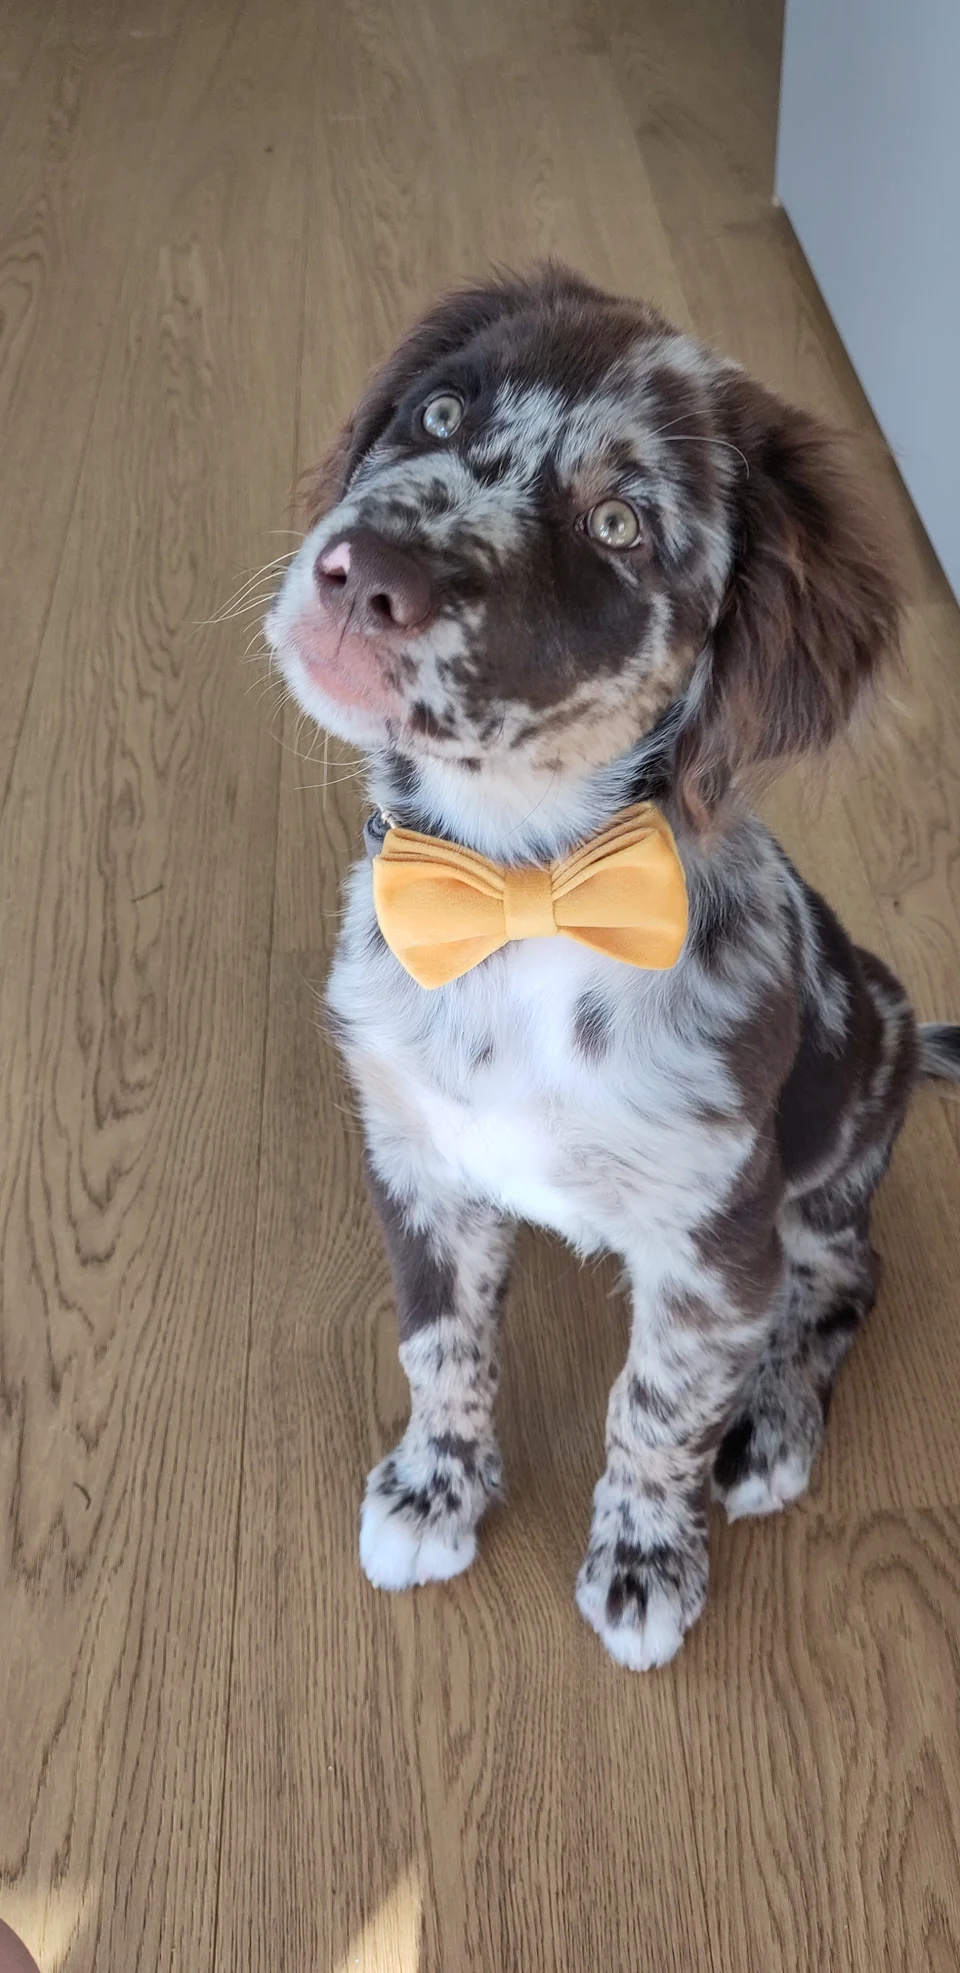 Getting ready for his first day at my office